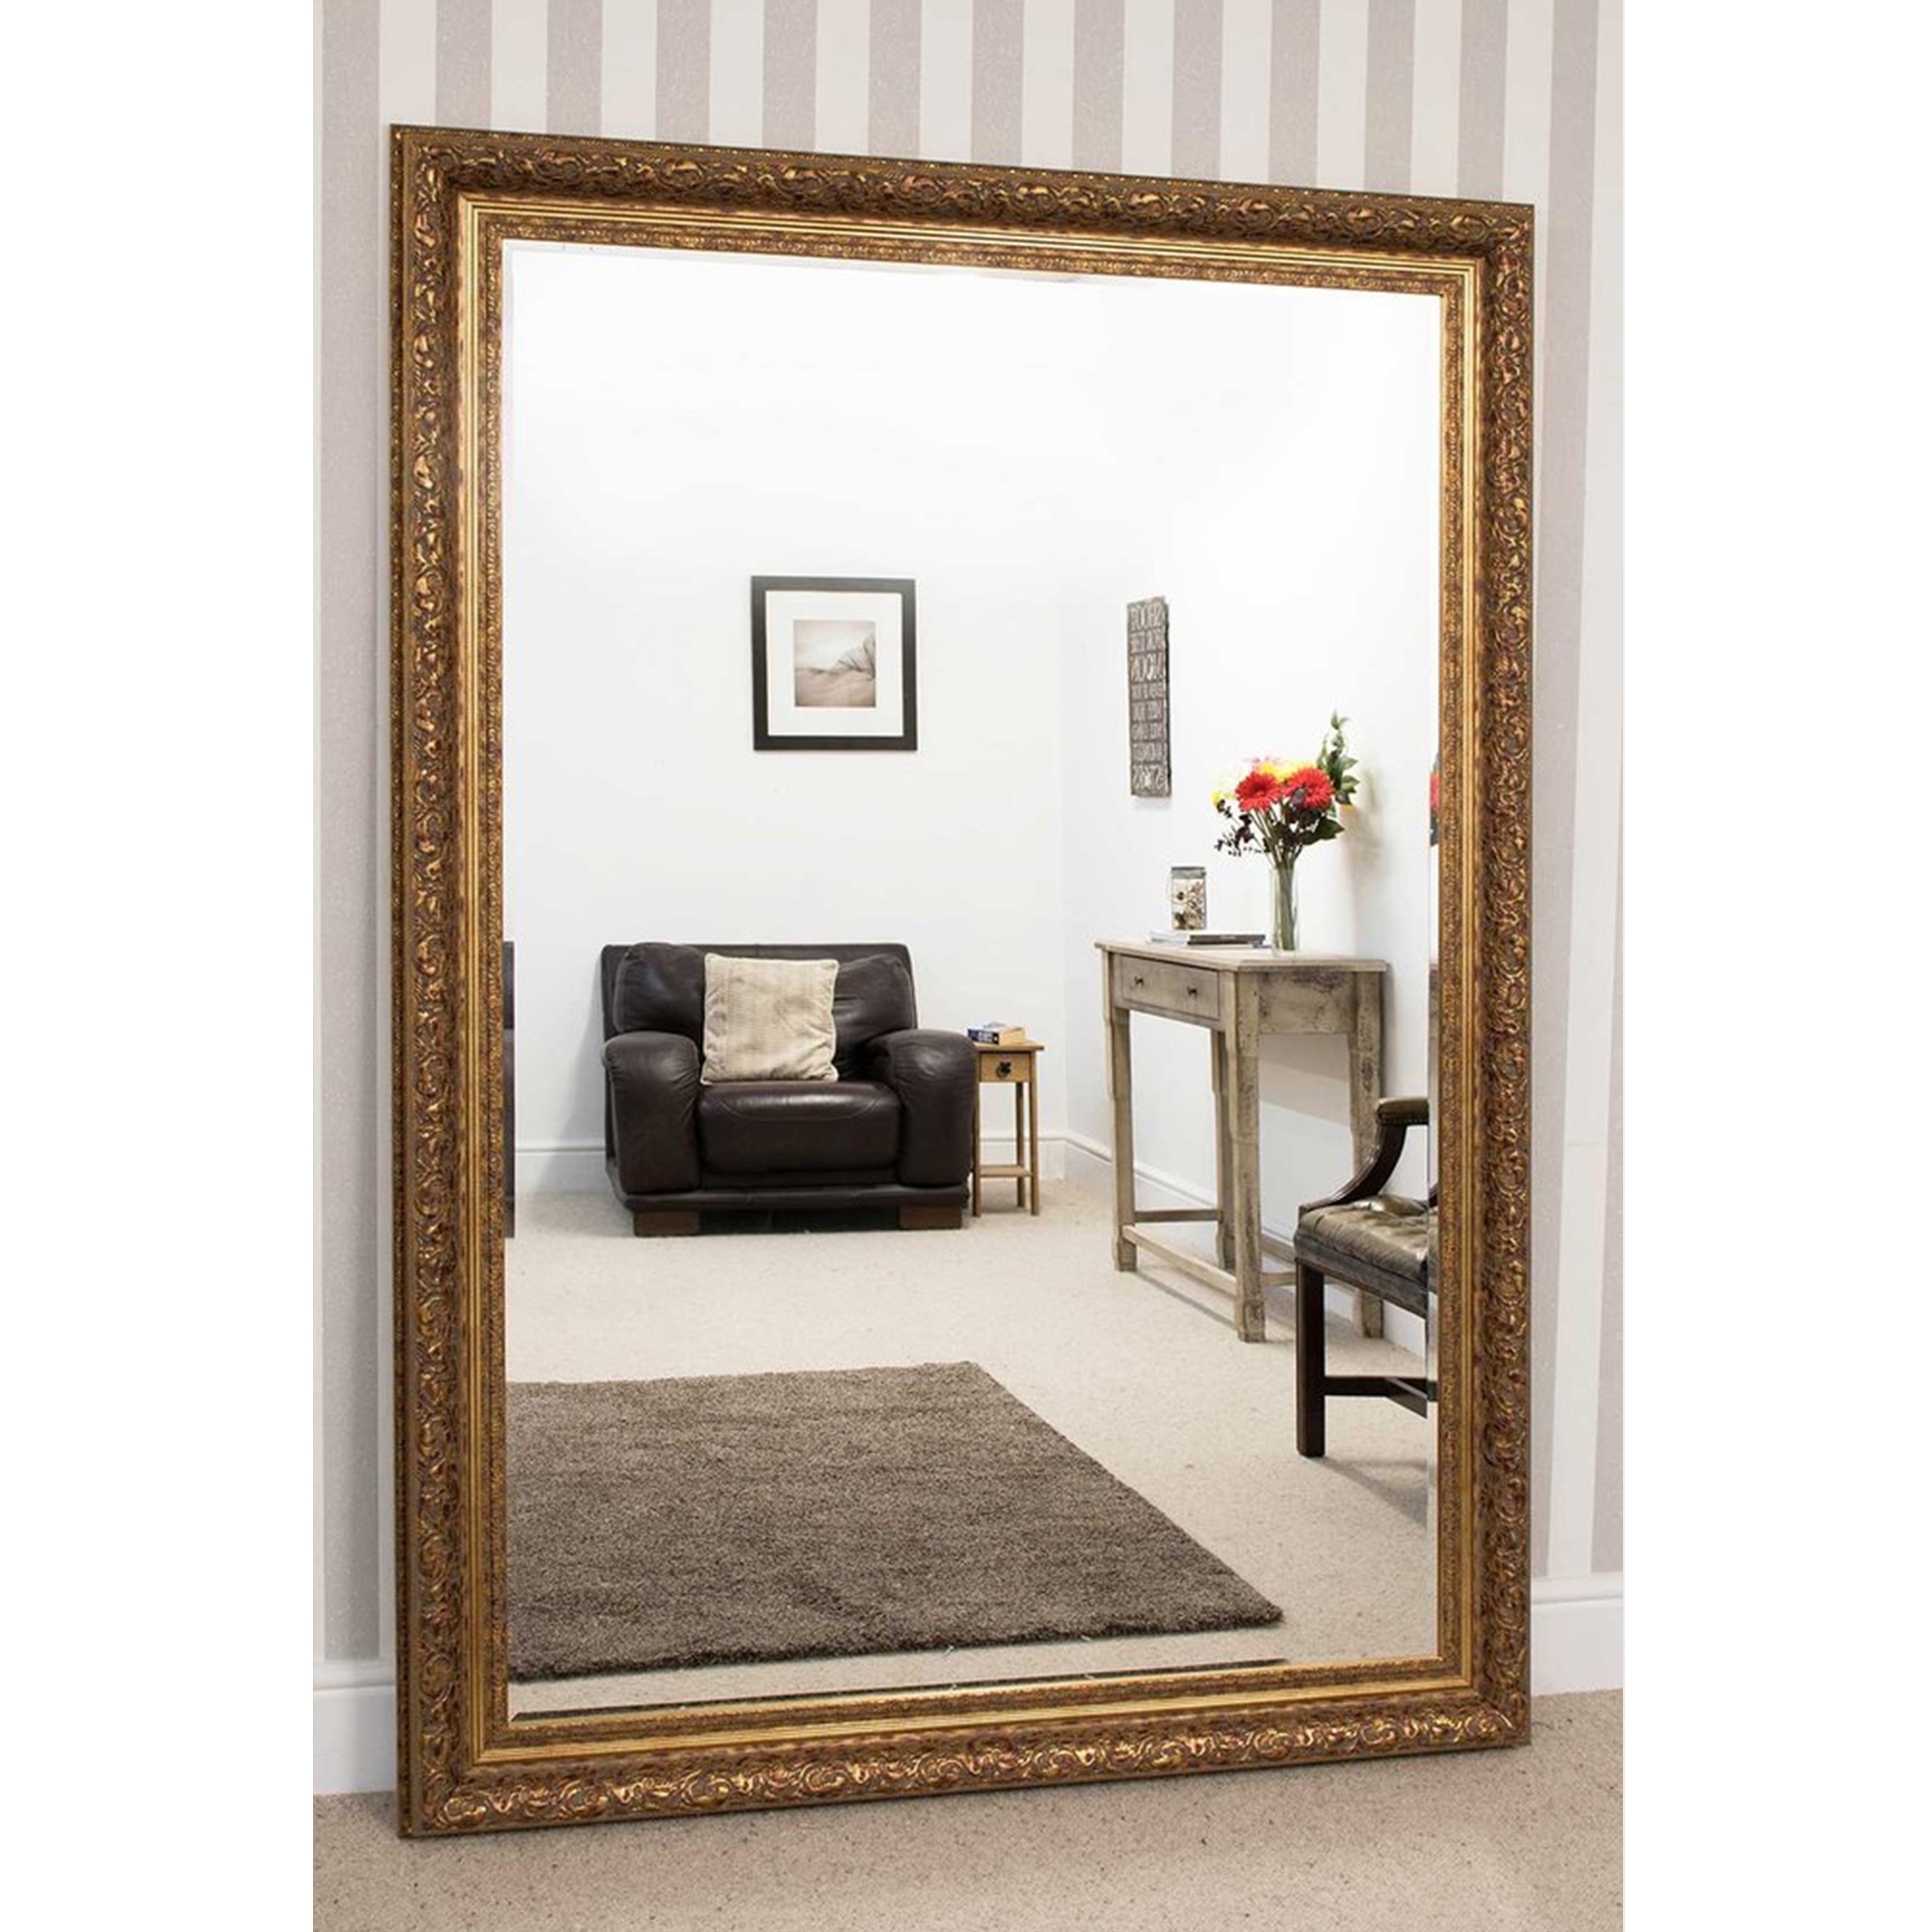 Antique gold french mirror